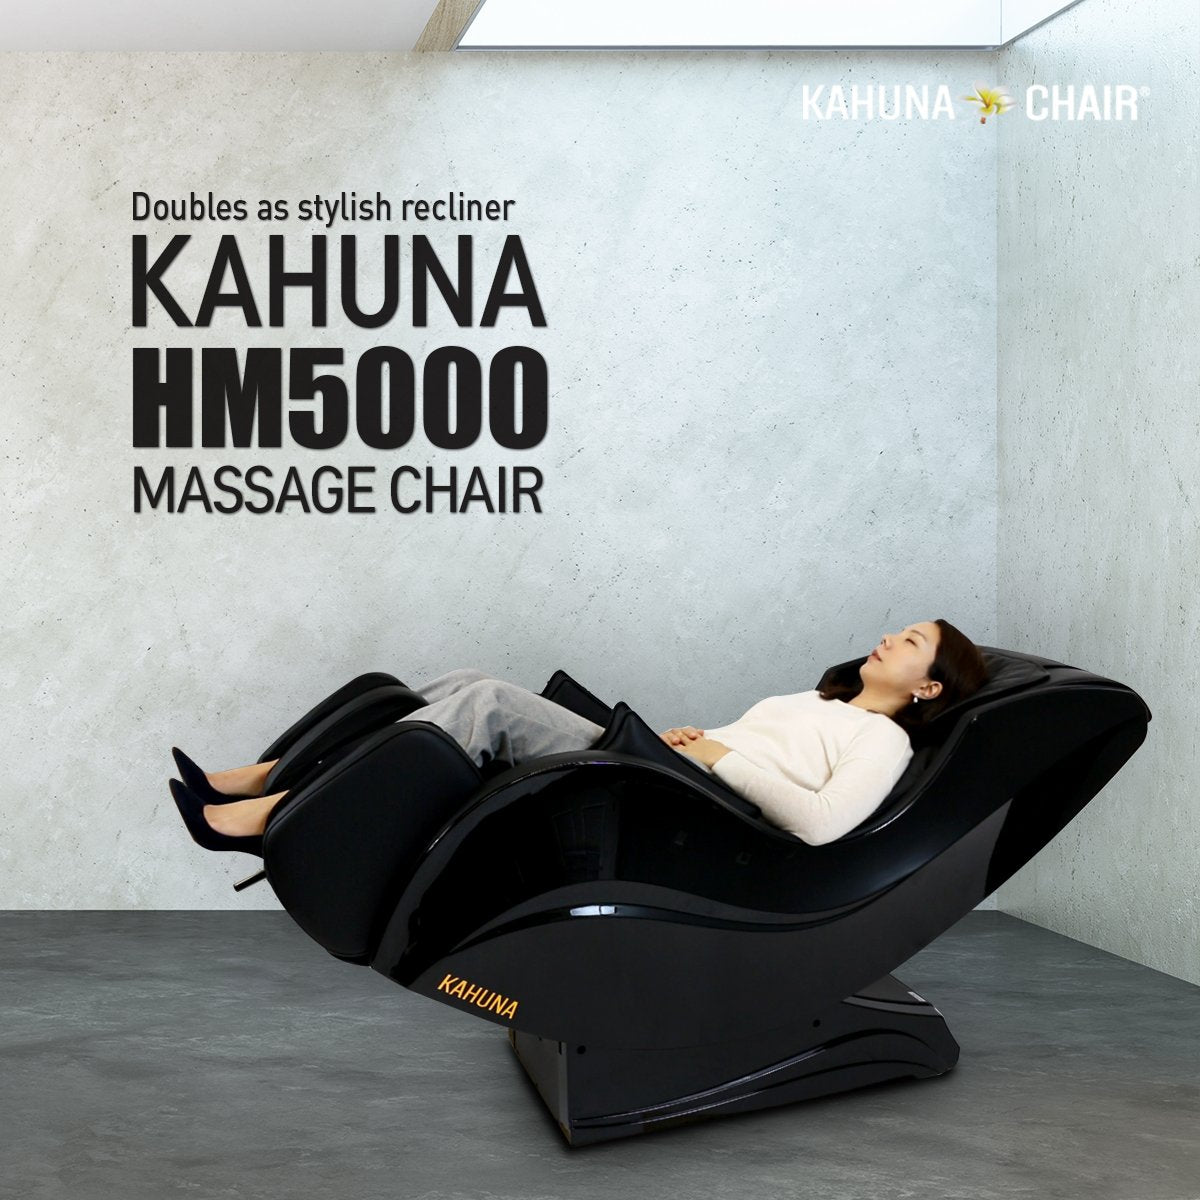 kahuna limitless slender double as stylish recliner massage chair